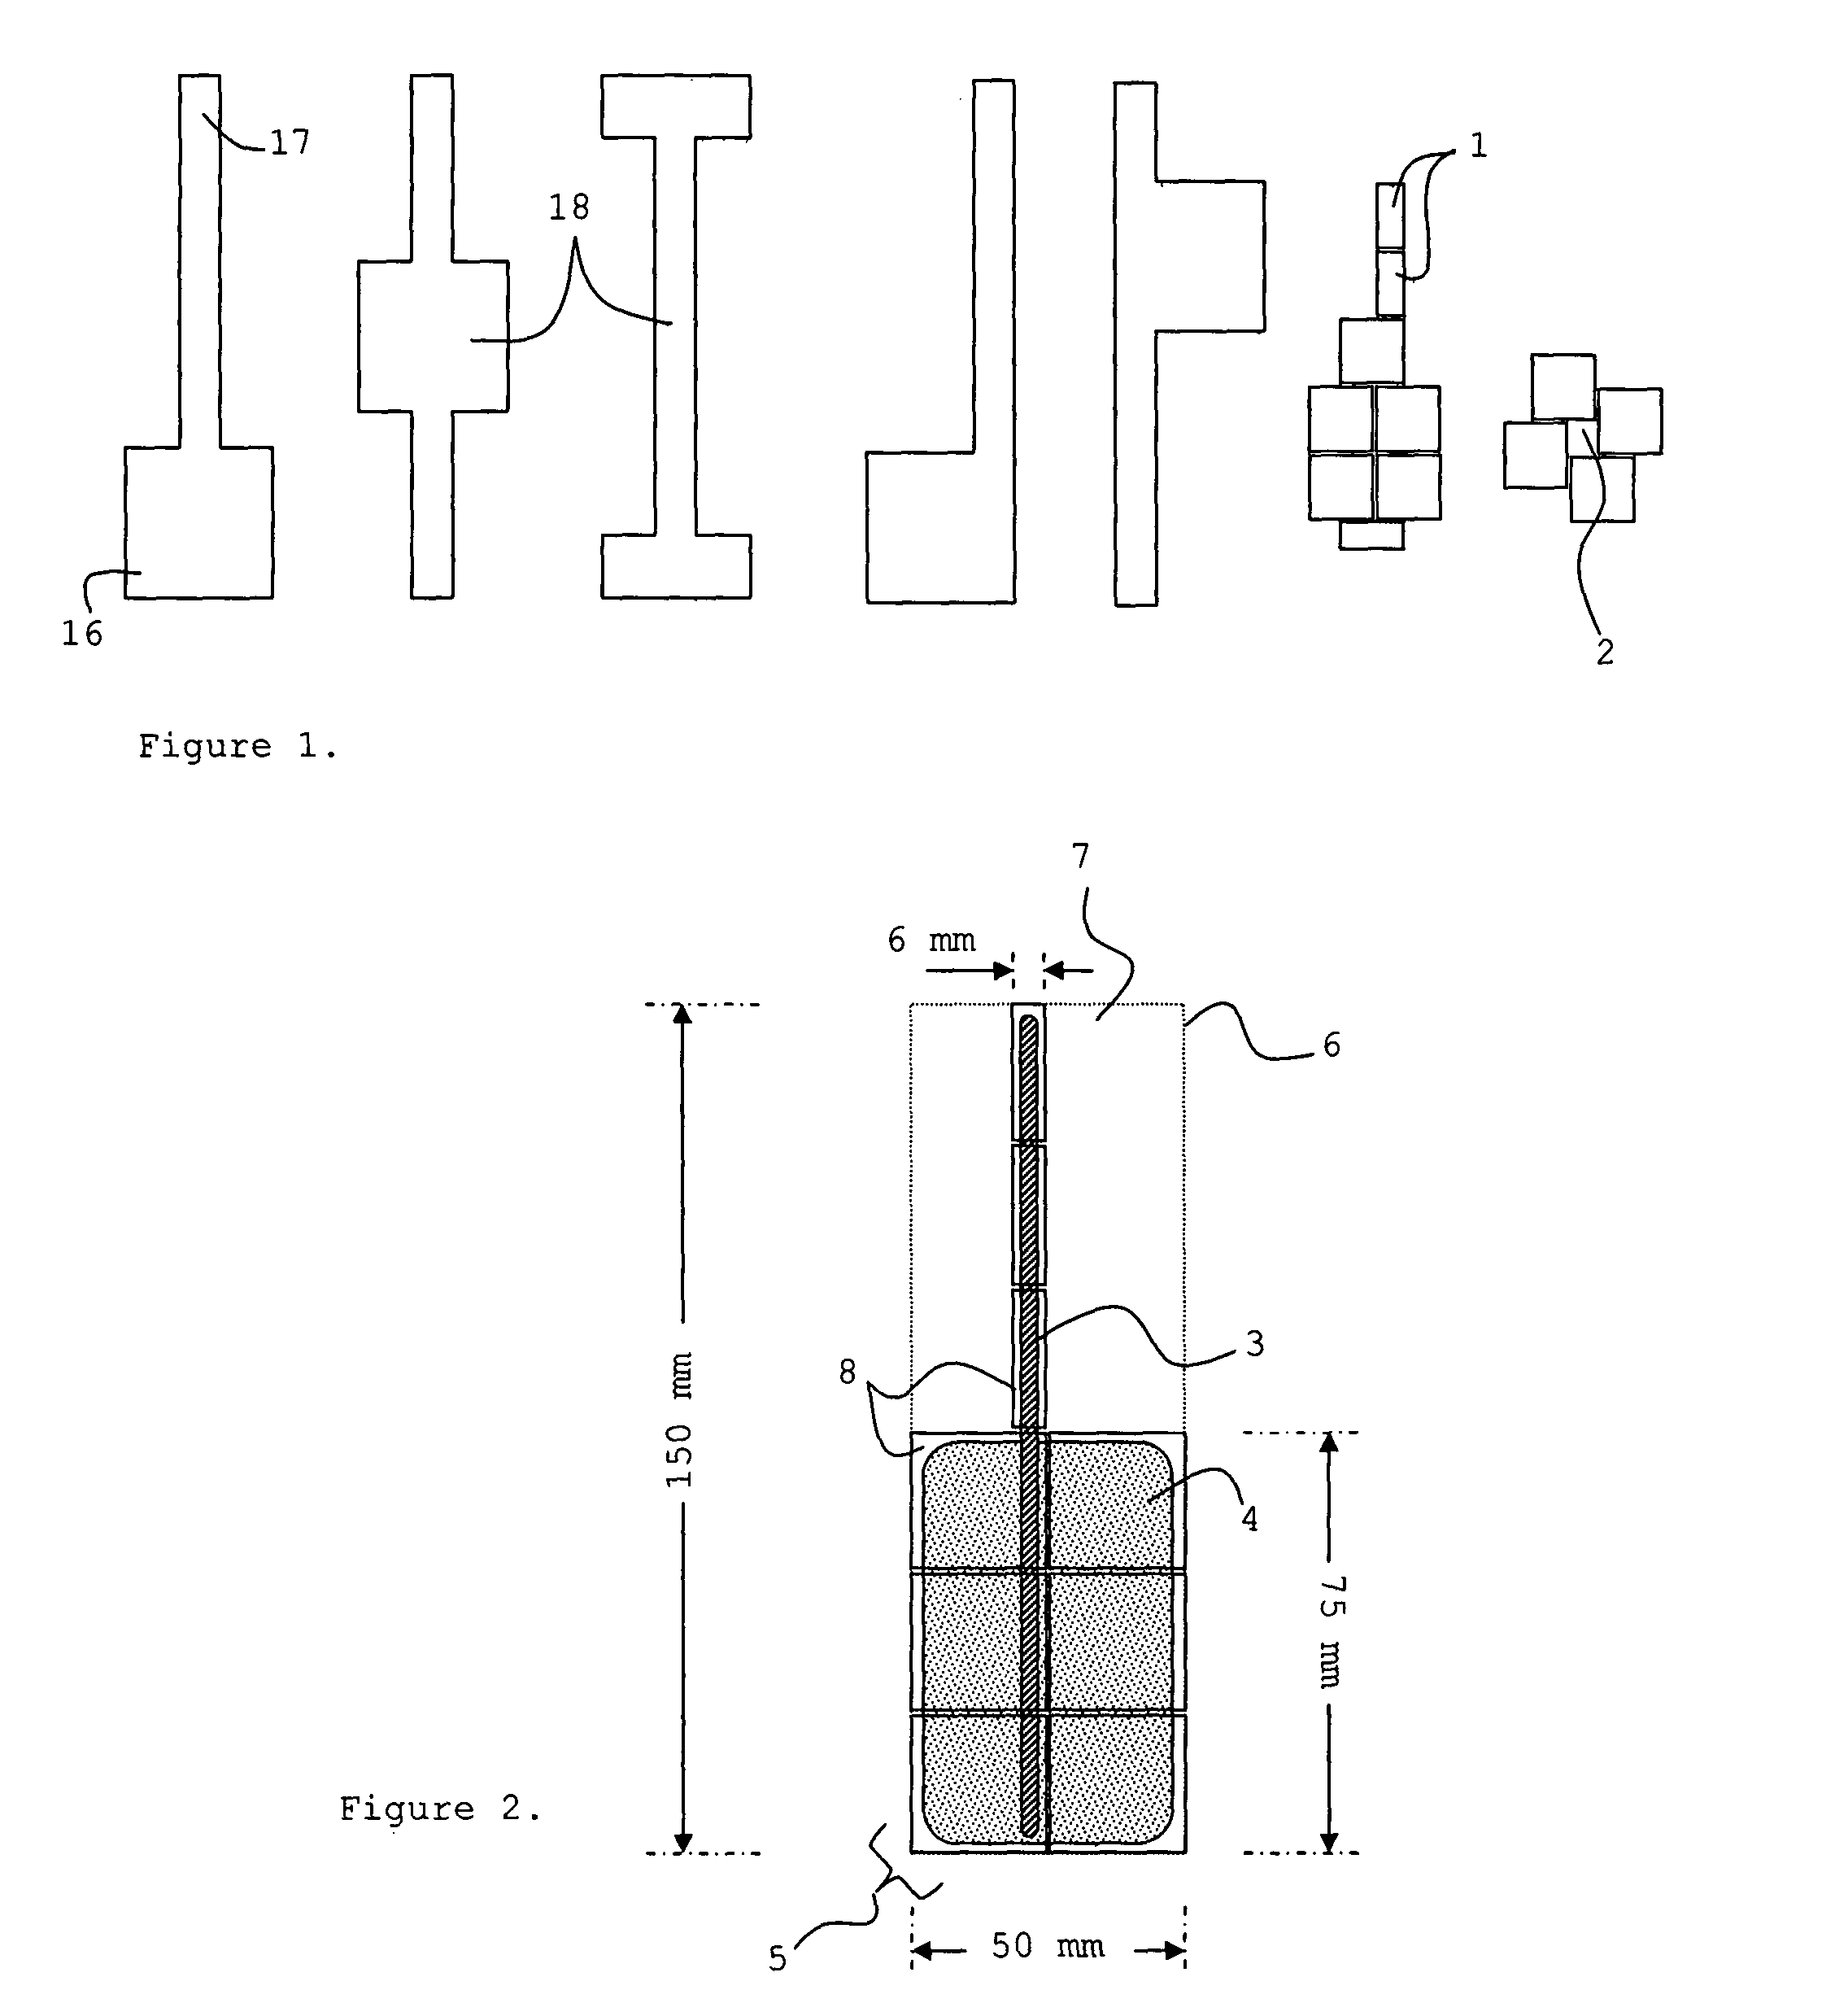 Radiation imaging device with irregular rectangular shape and extraoral dental imaging system therefrom